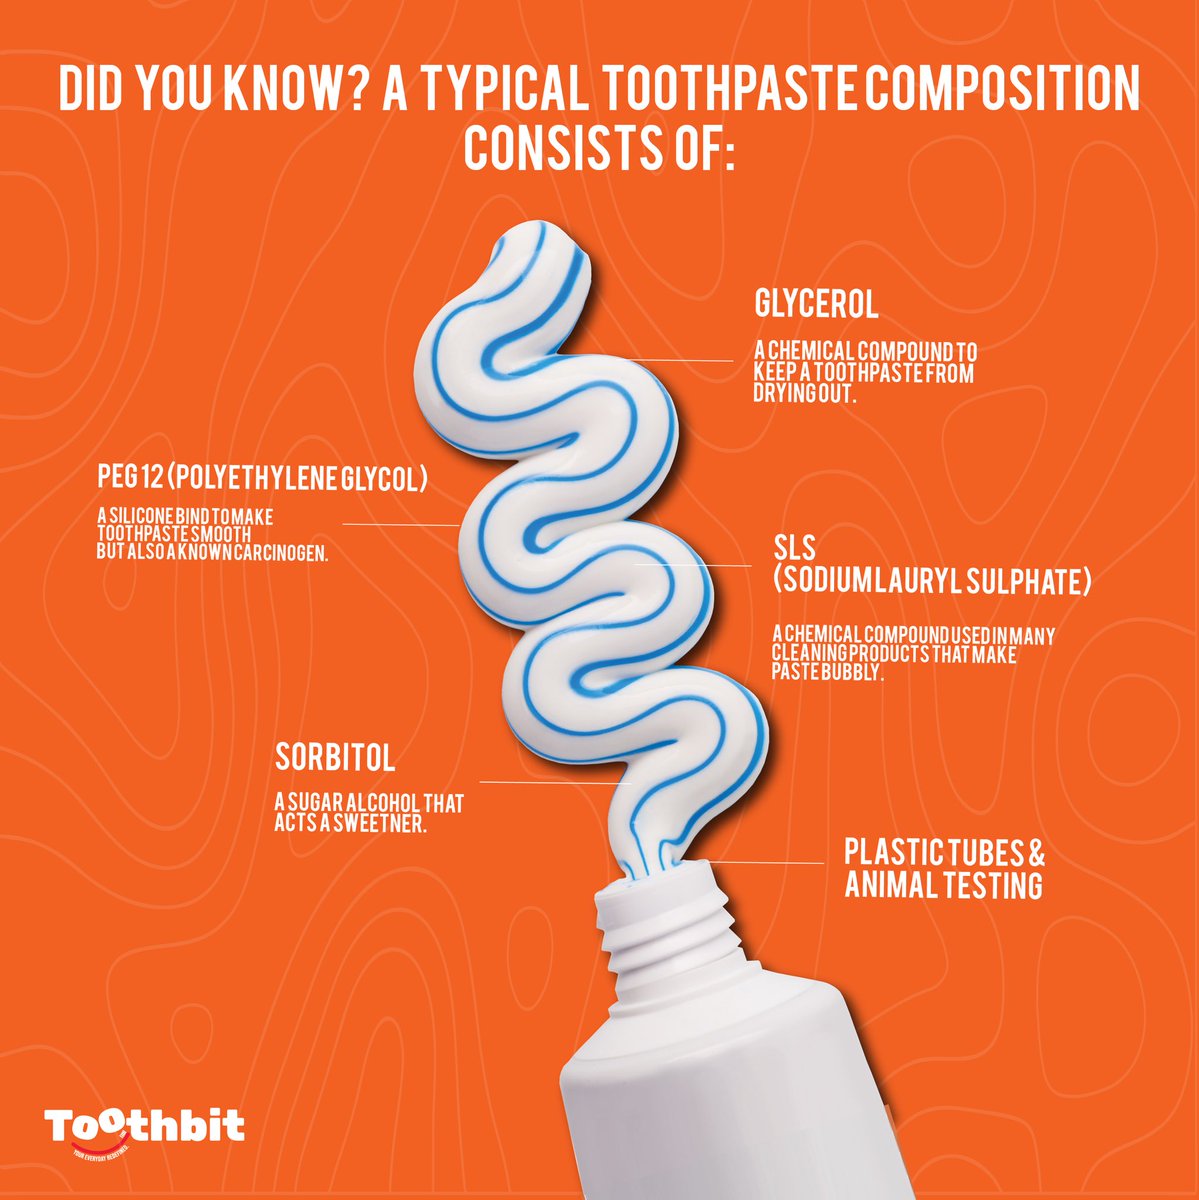 Say goodbye to microplastics, SLS, glycerol, PEG 12, and fluoride in your toothpaste! 💫 Switch to #Toothbit for healthier dental care. 🦷 Made in India, launching soon! 🇮🇳  #SustainableDental #HealthySmile #SayNoToPlastics #IndiaMade #DentalCare #OralHygiene #NaturalIngredients